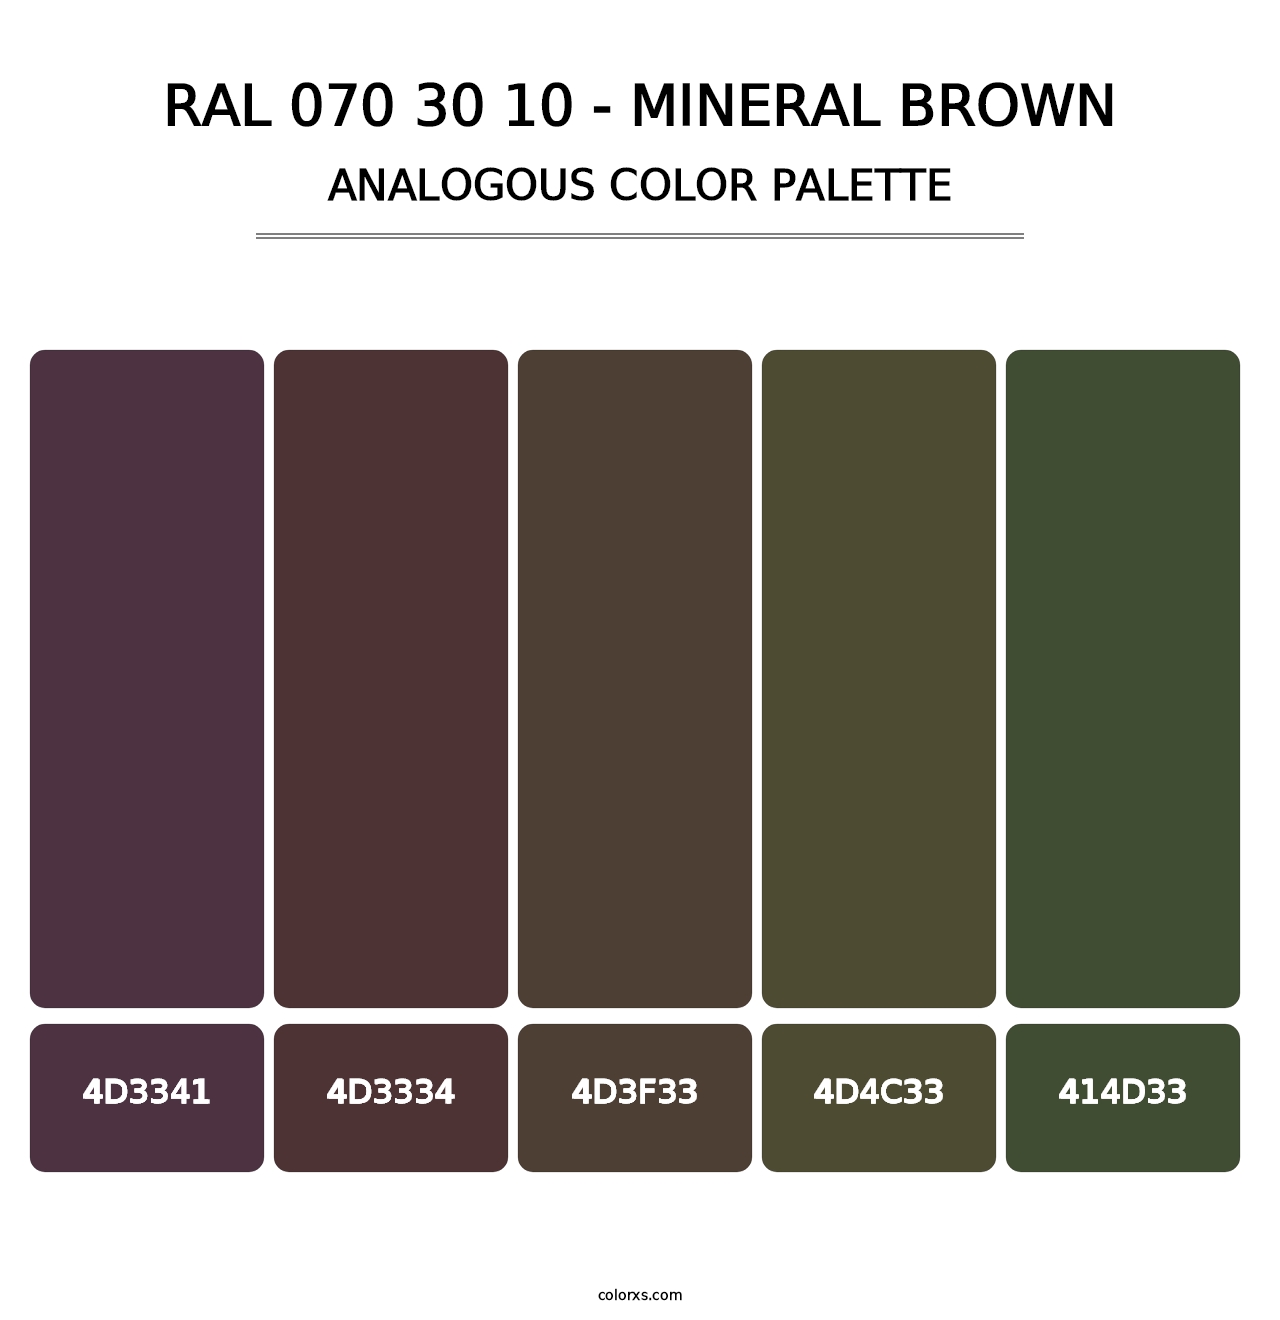 RAL 070 30 10 - Mineral Brown - Analogous Color Palette